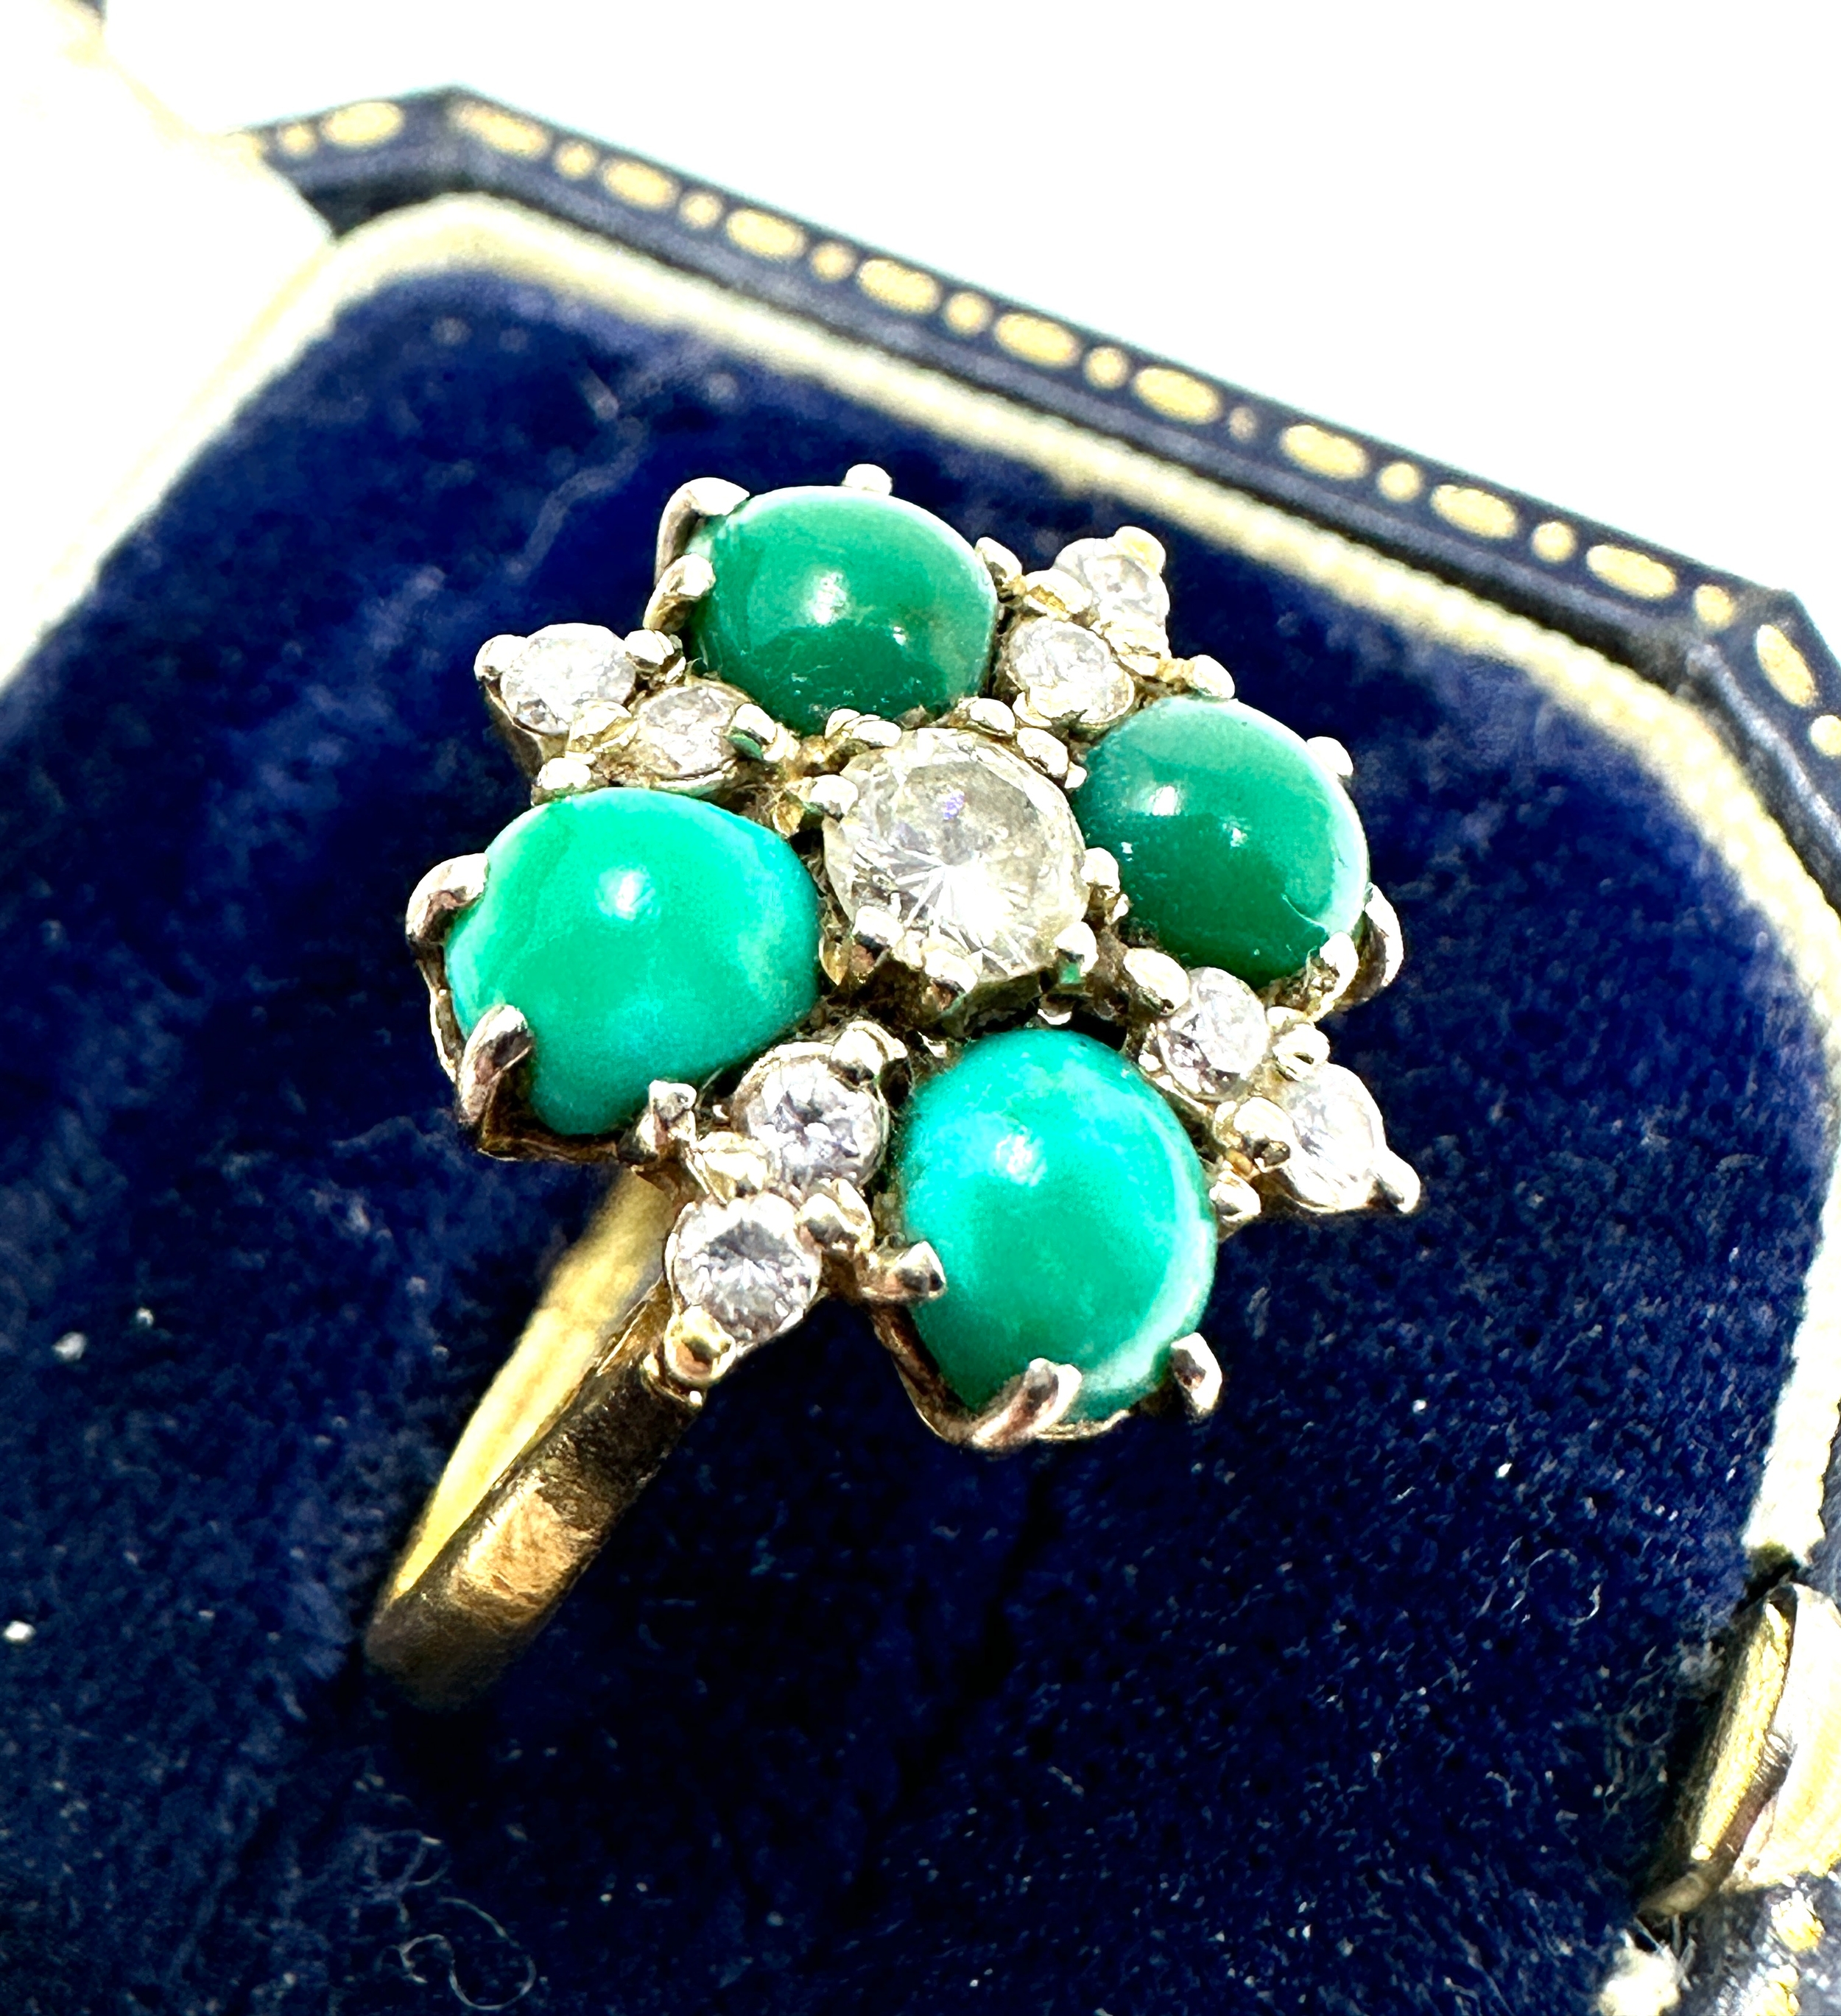 antique 18ct gold diamond & turquoise ring weight 4.2g - Image 2 of 4